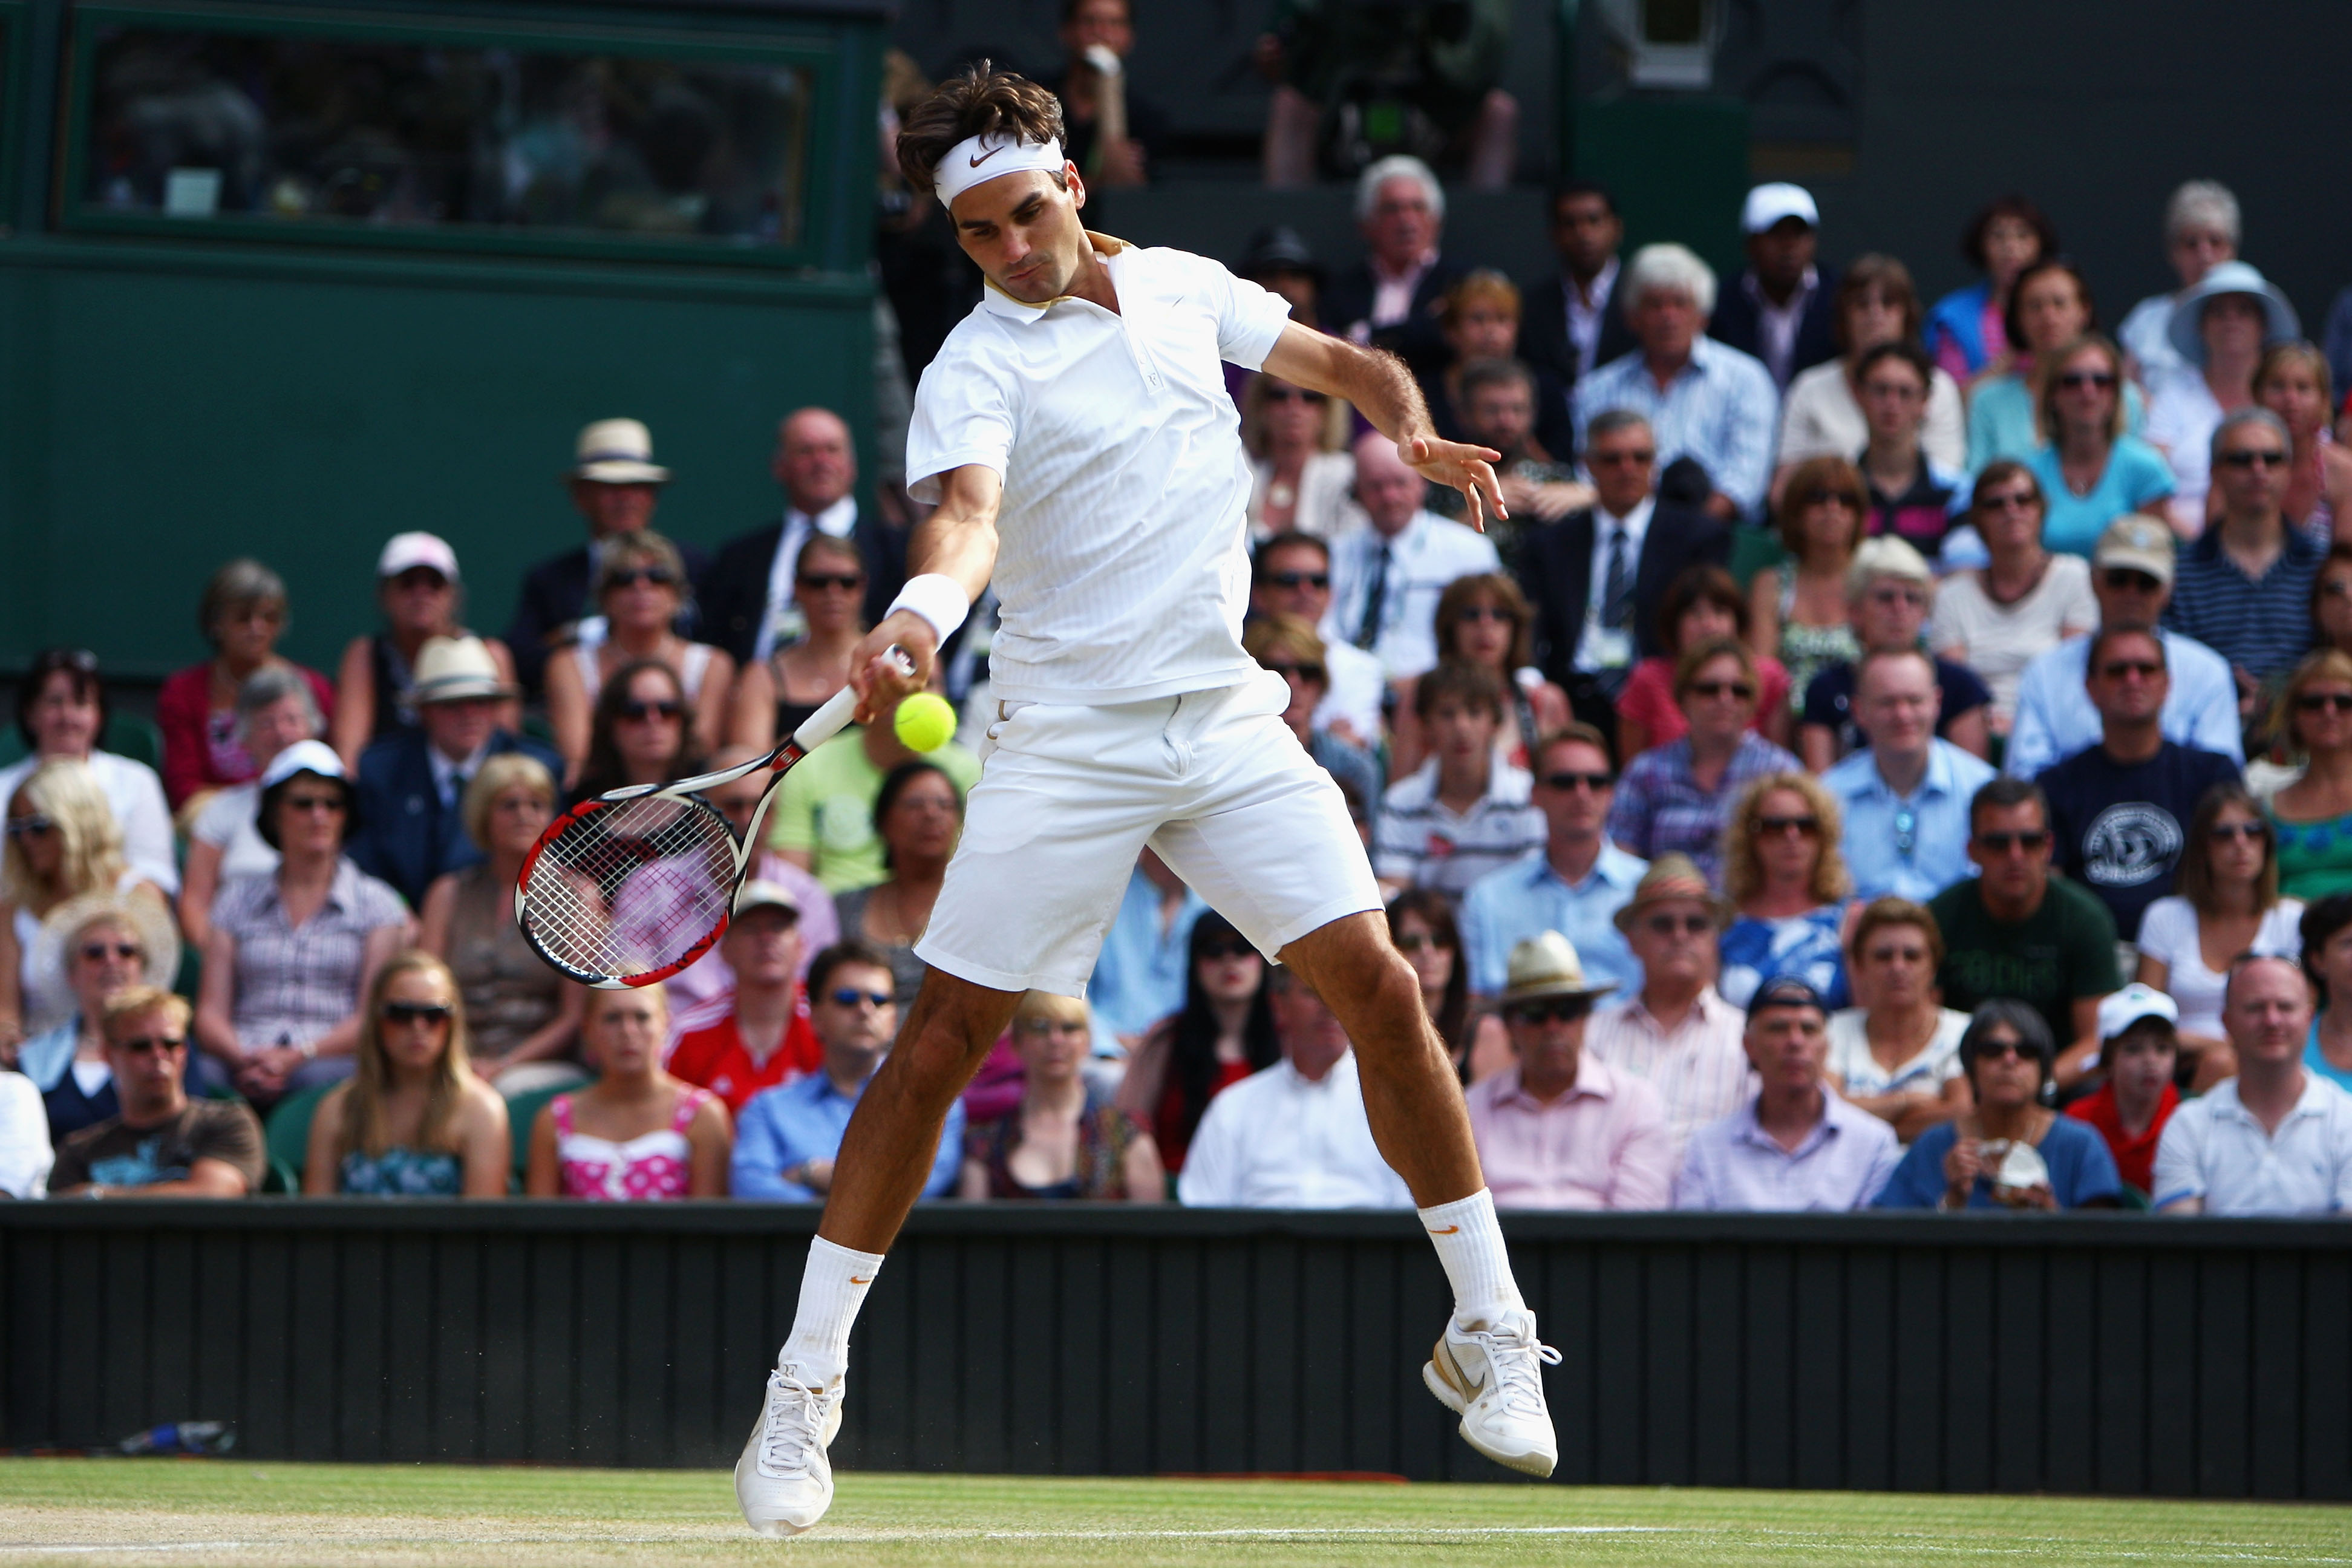 Wimbledon 2011: Rafael Nadal and the Top 20 Men's Players of All 